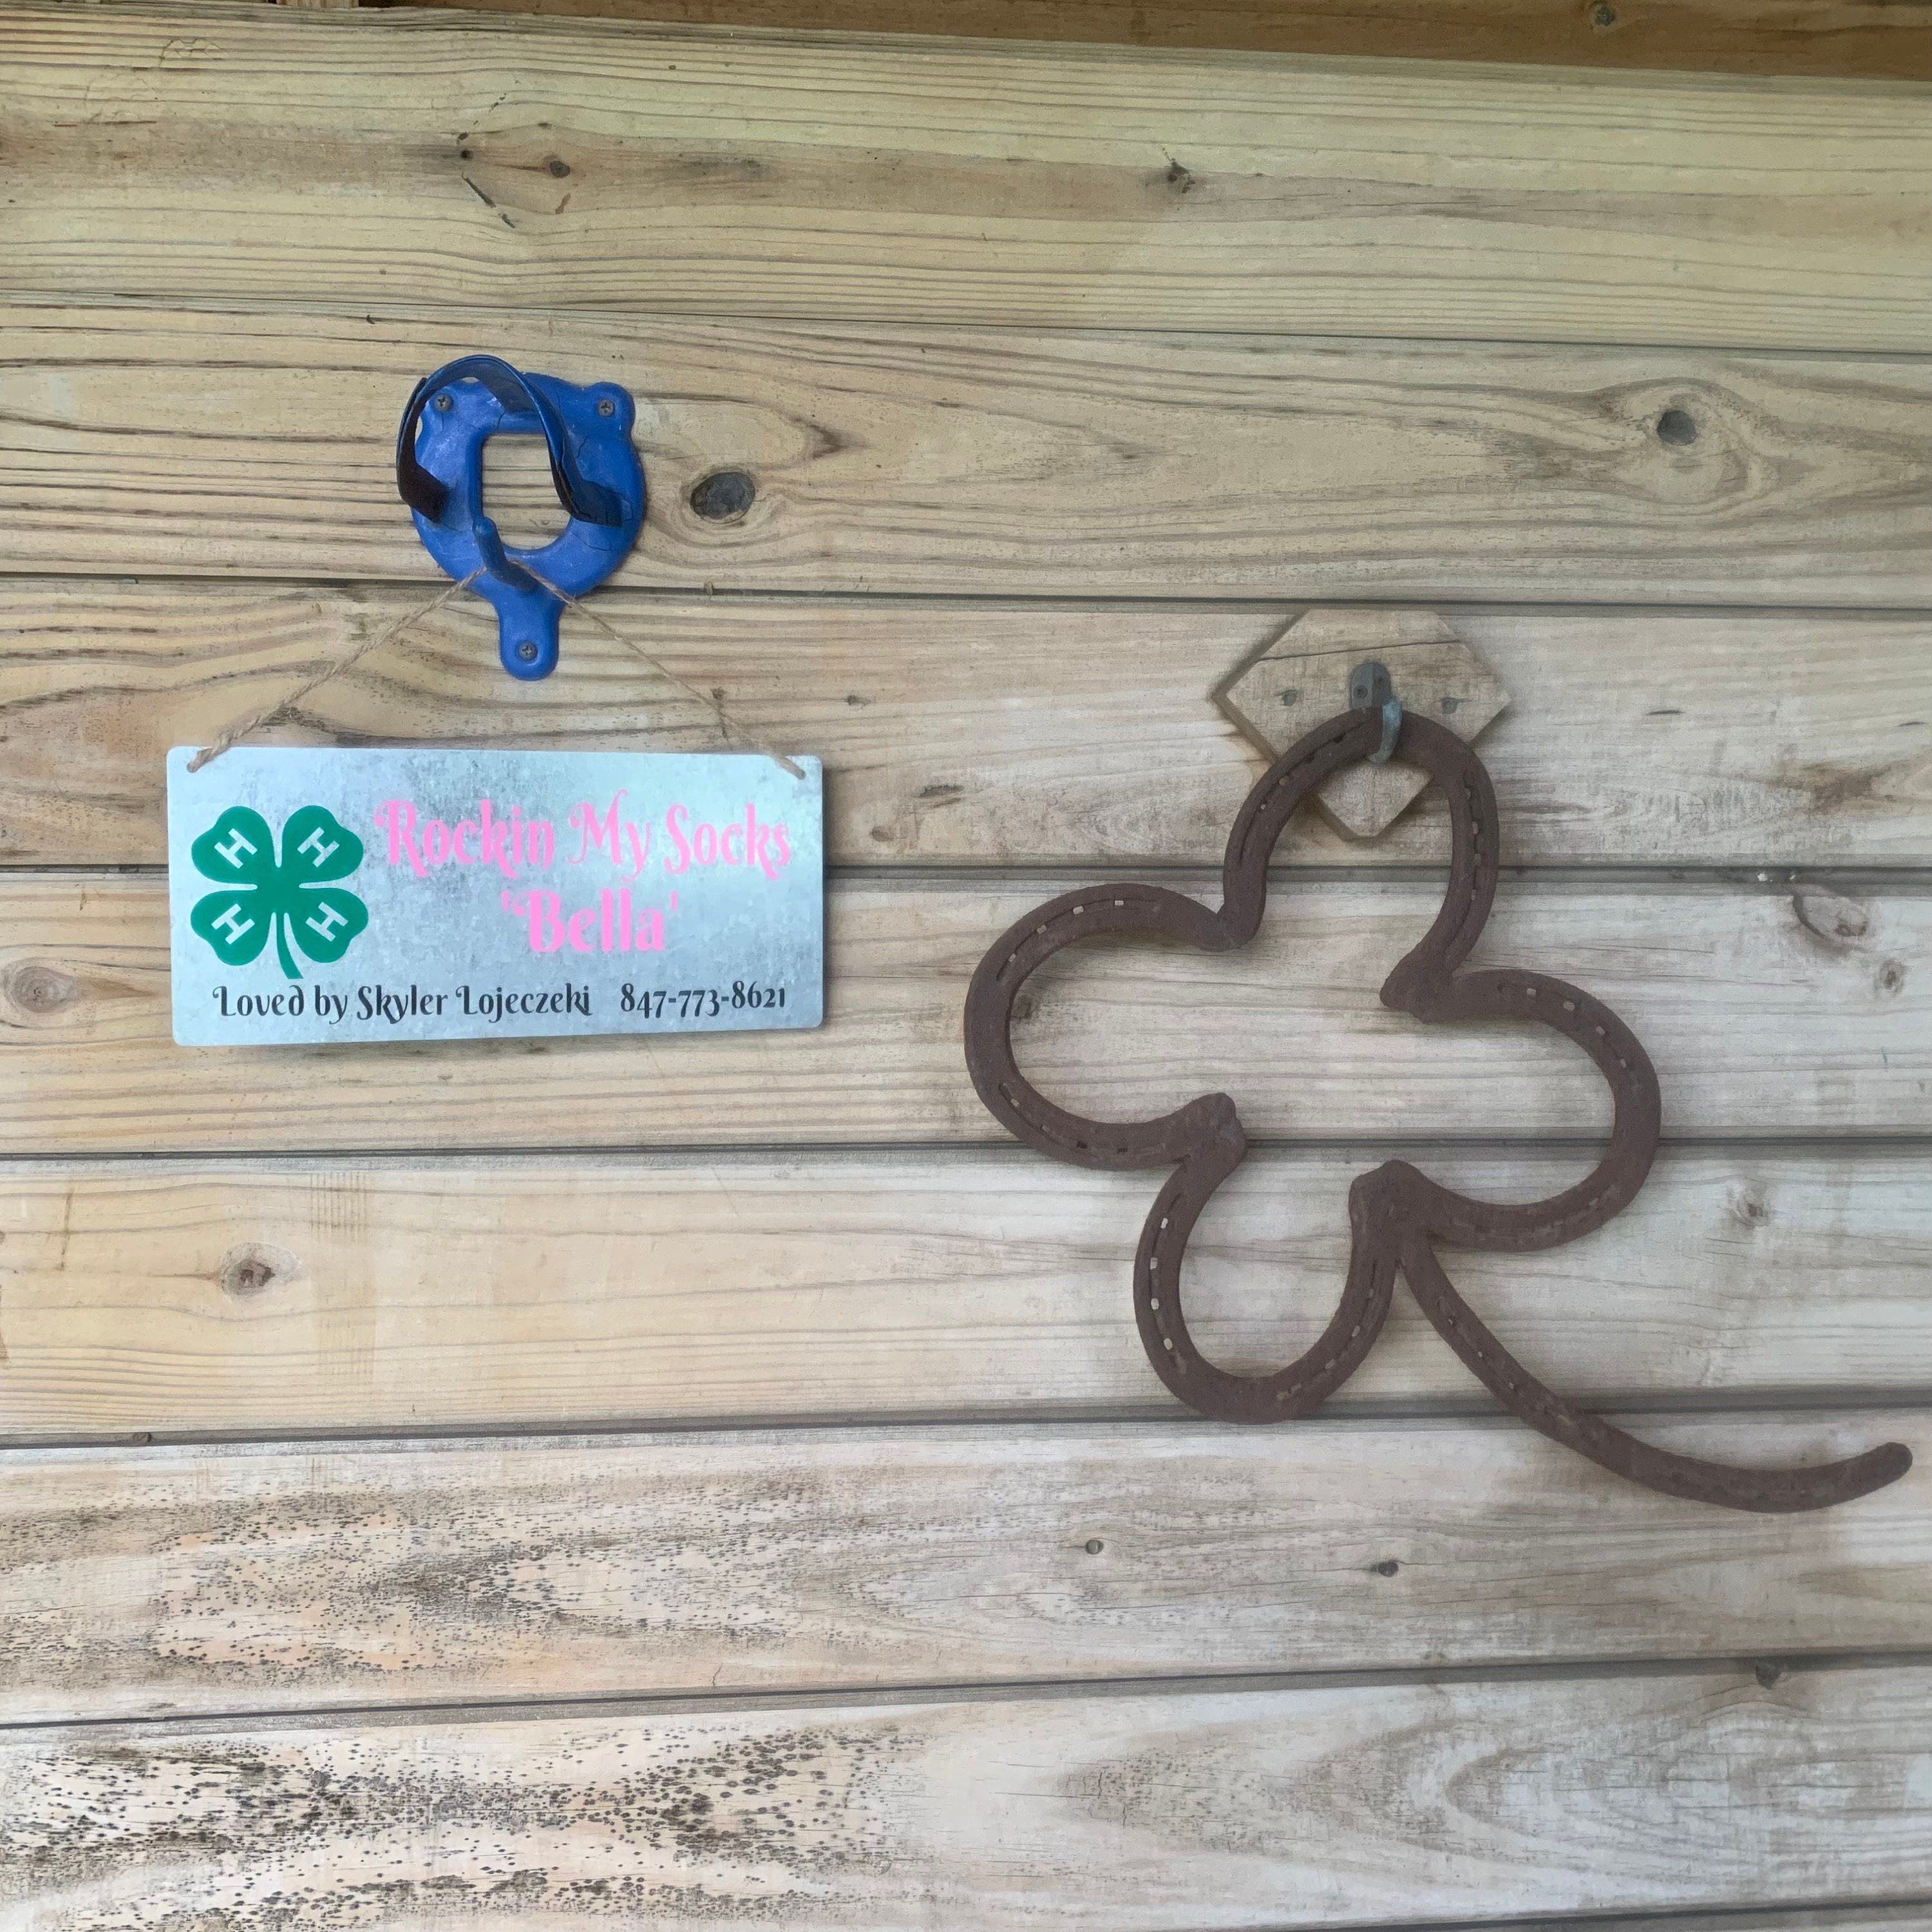 4-H Stall Sign With Horse Owner Info 4-H 4-H Fair Stall